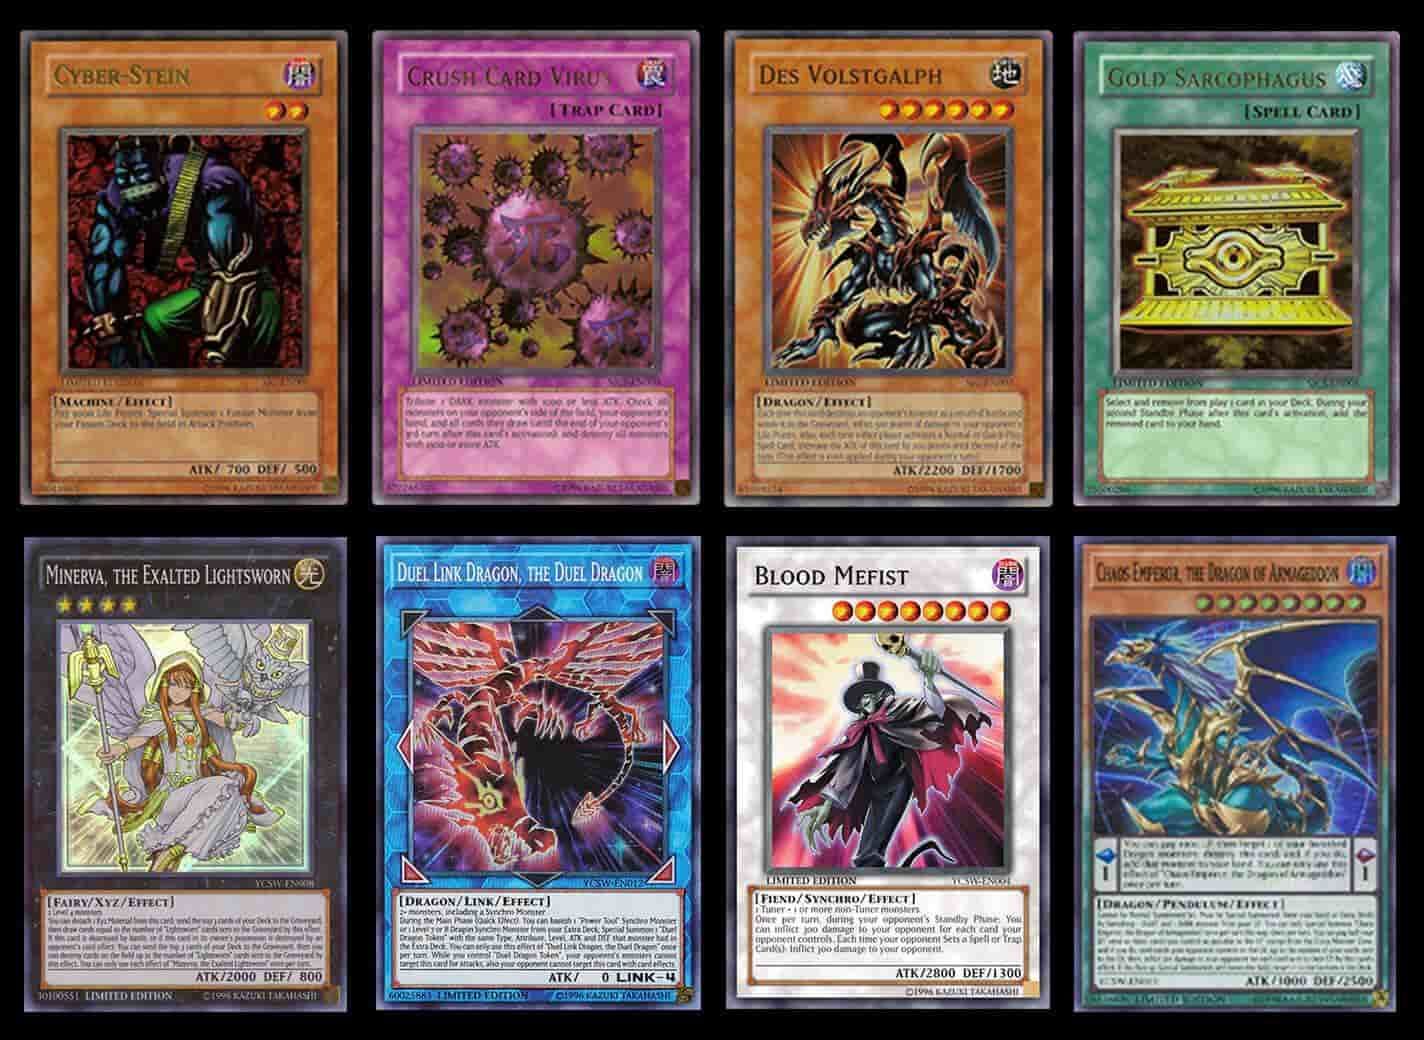 The History of Yu-Gi-Oh!